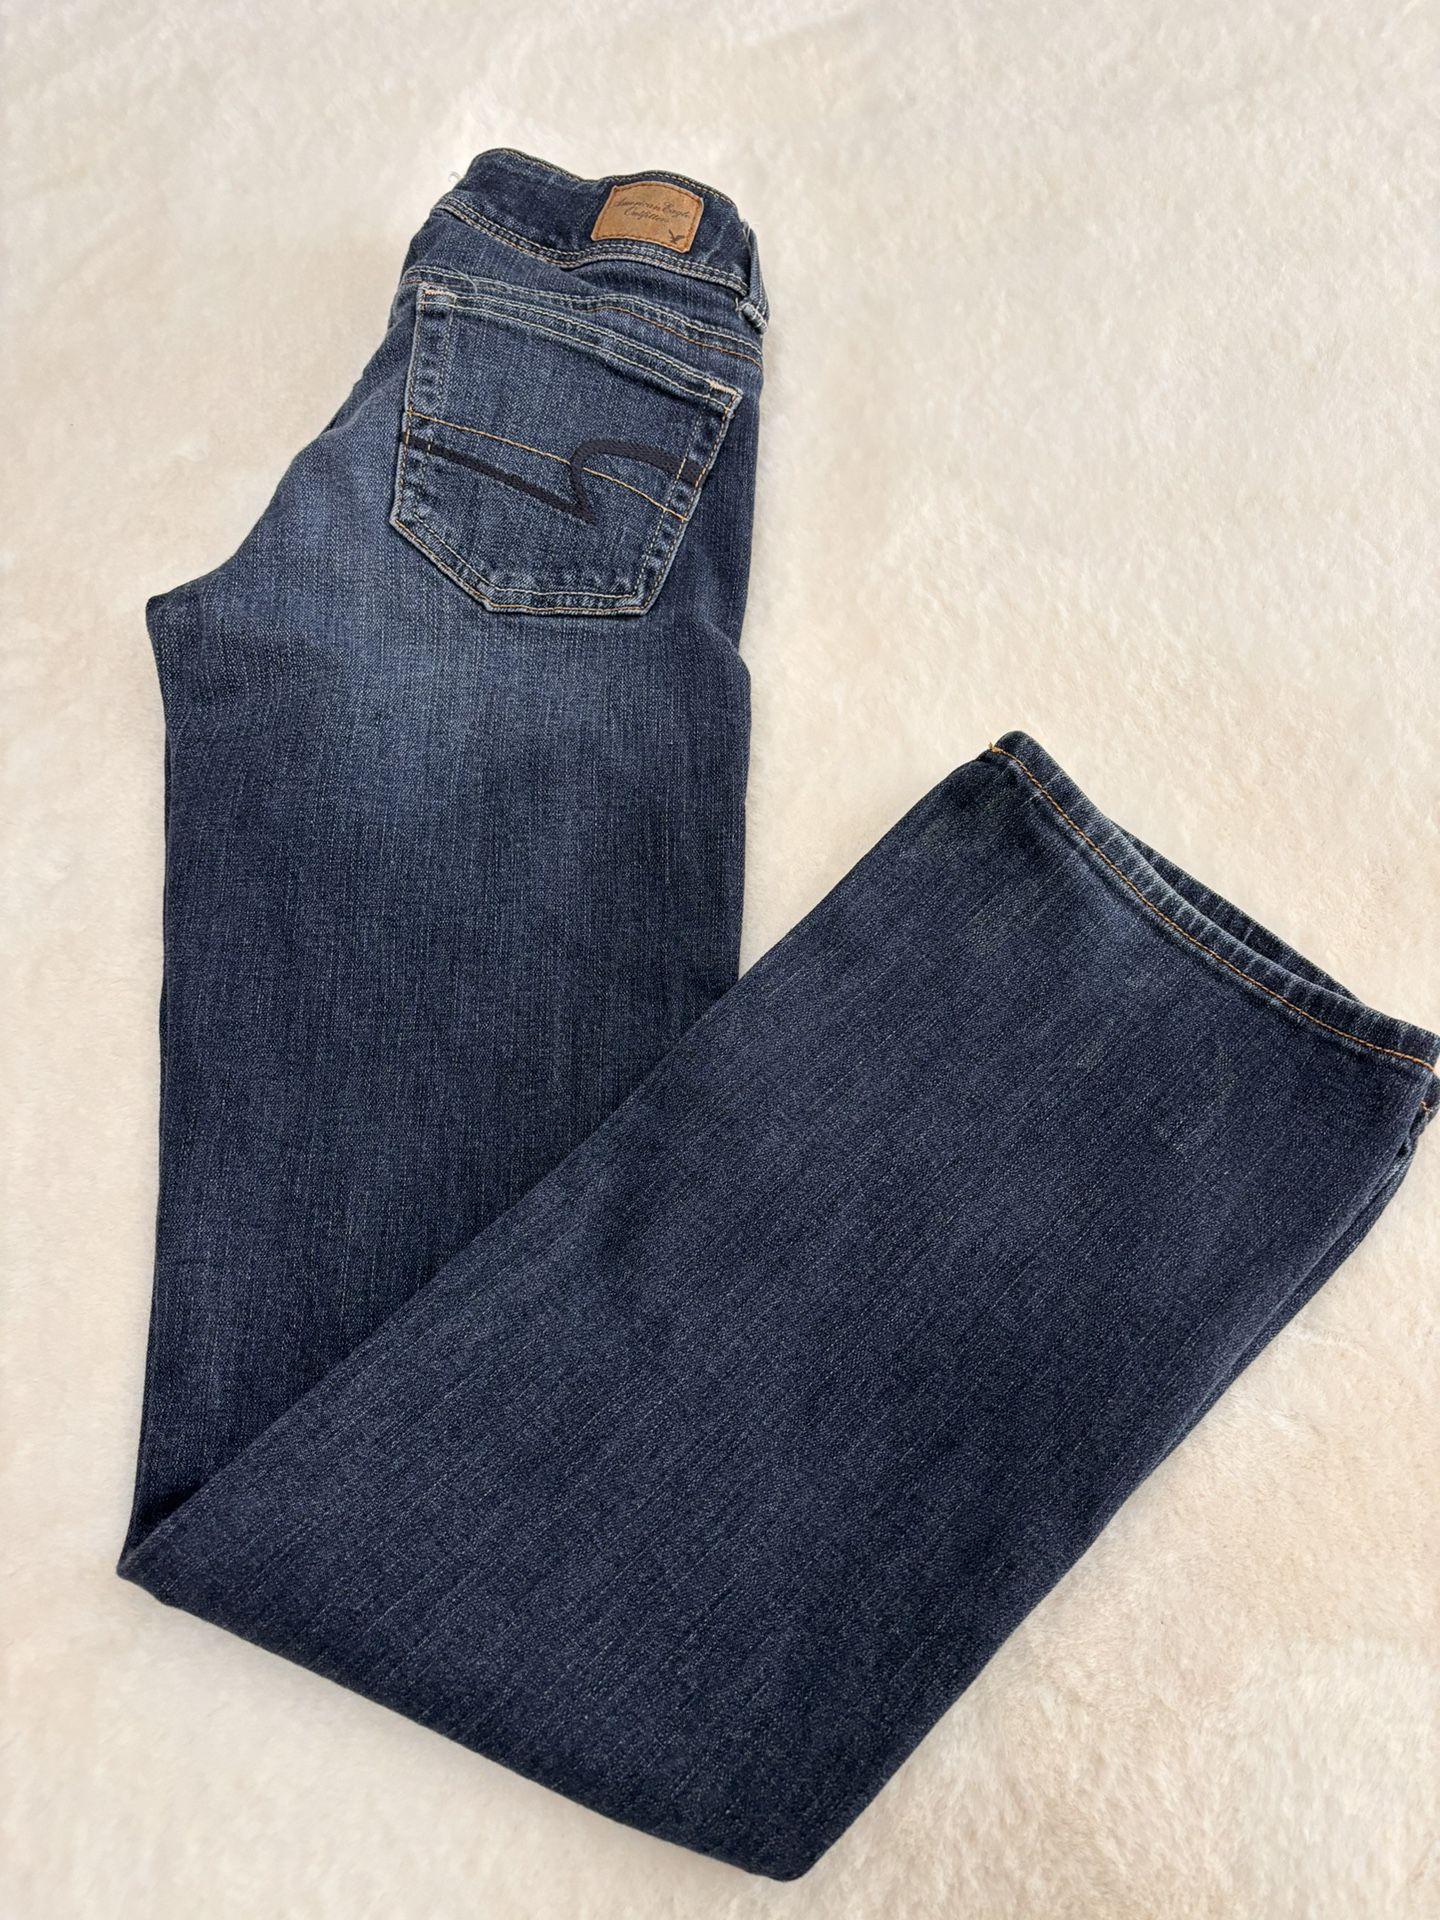 Womens American Eagle Bootcut Jeans